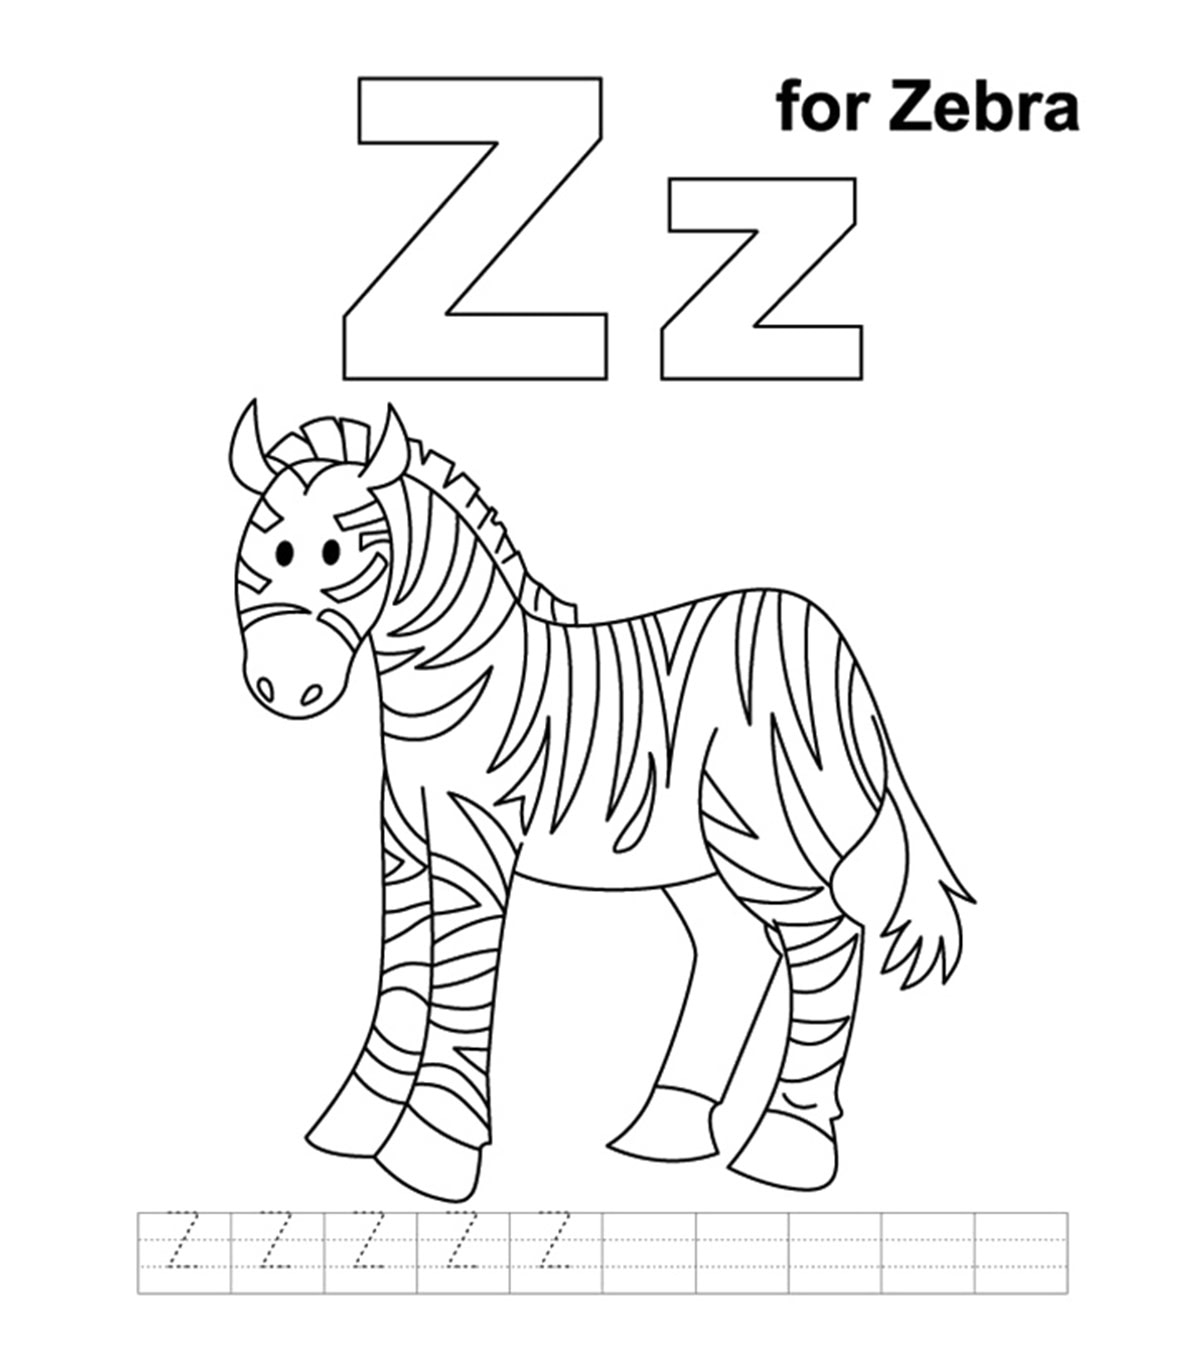 Top 10 Letter ‘Z’ Coloring Pages Your Toddler Will Love To Learn & Color_image